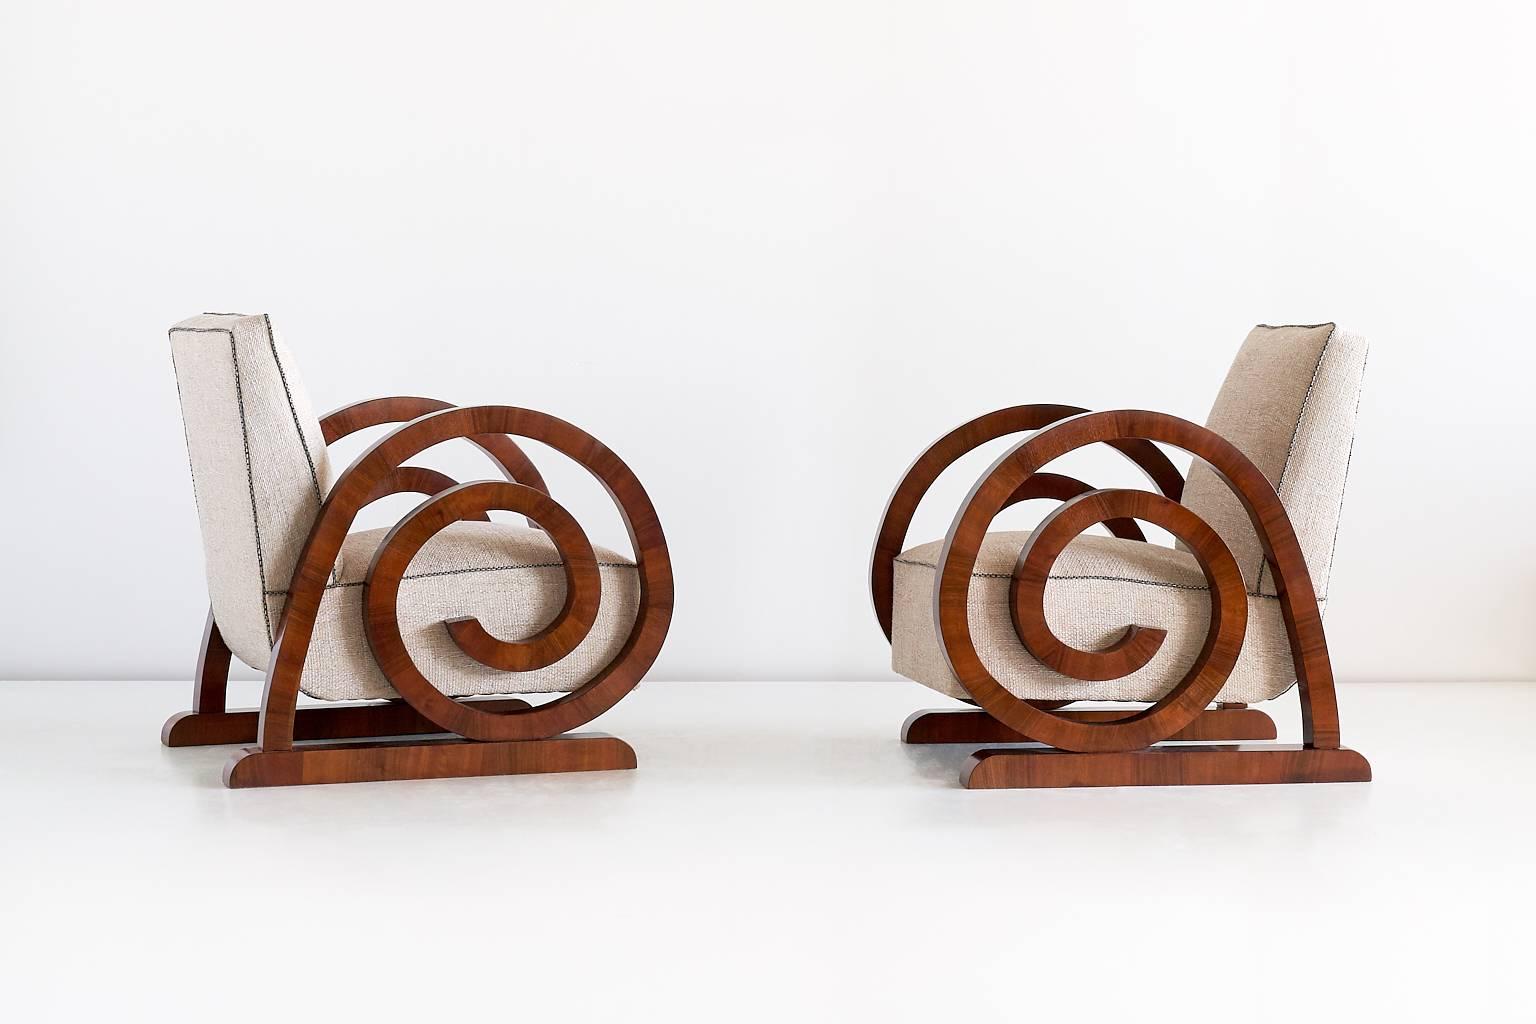 This extraordinary pair of Art Deco armchairs was produced in France in the 1930s. The dramatically curved arms are a modern interpretation of the "escargot"- or shell-motif that was prevalent in earlier French furniture periods. The